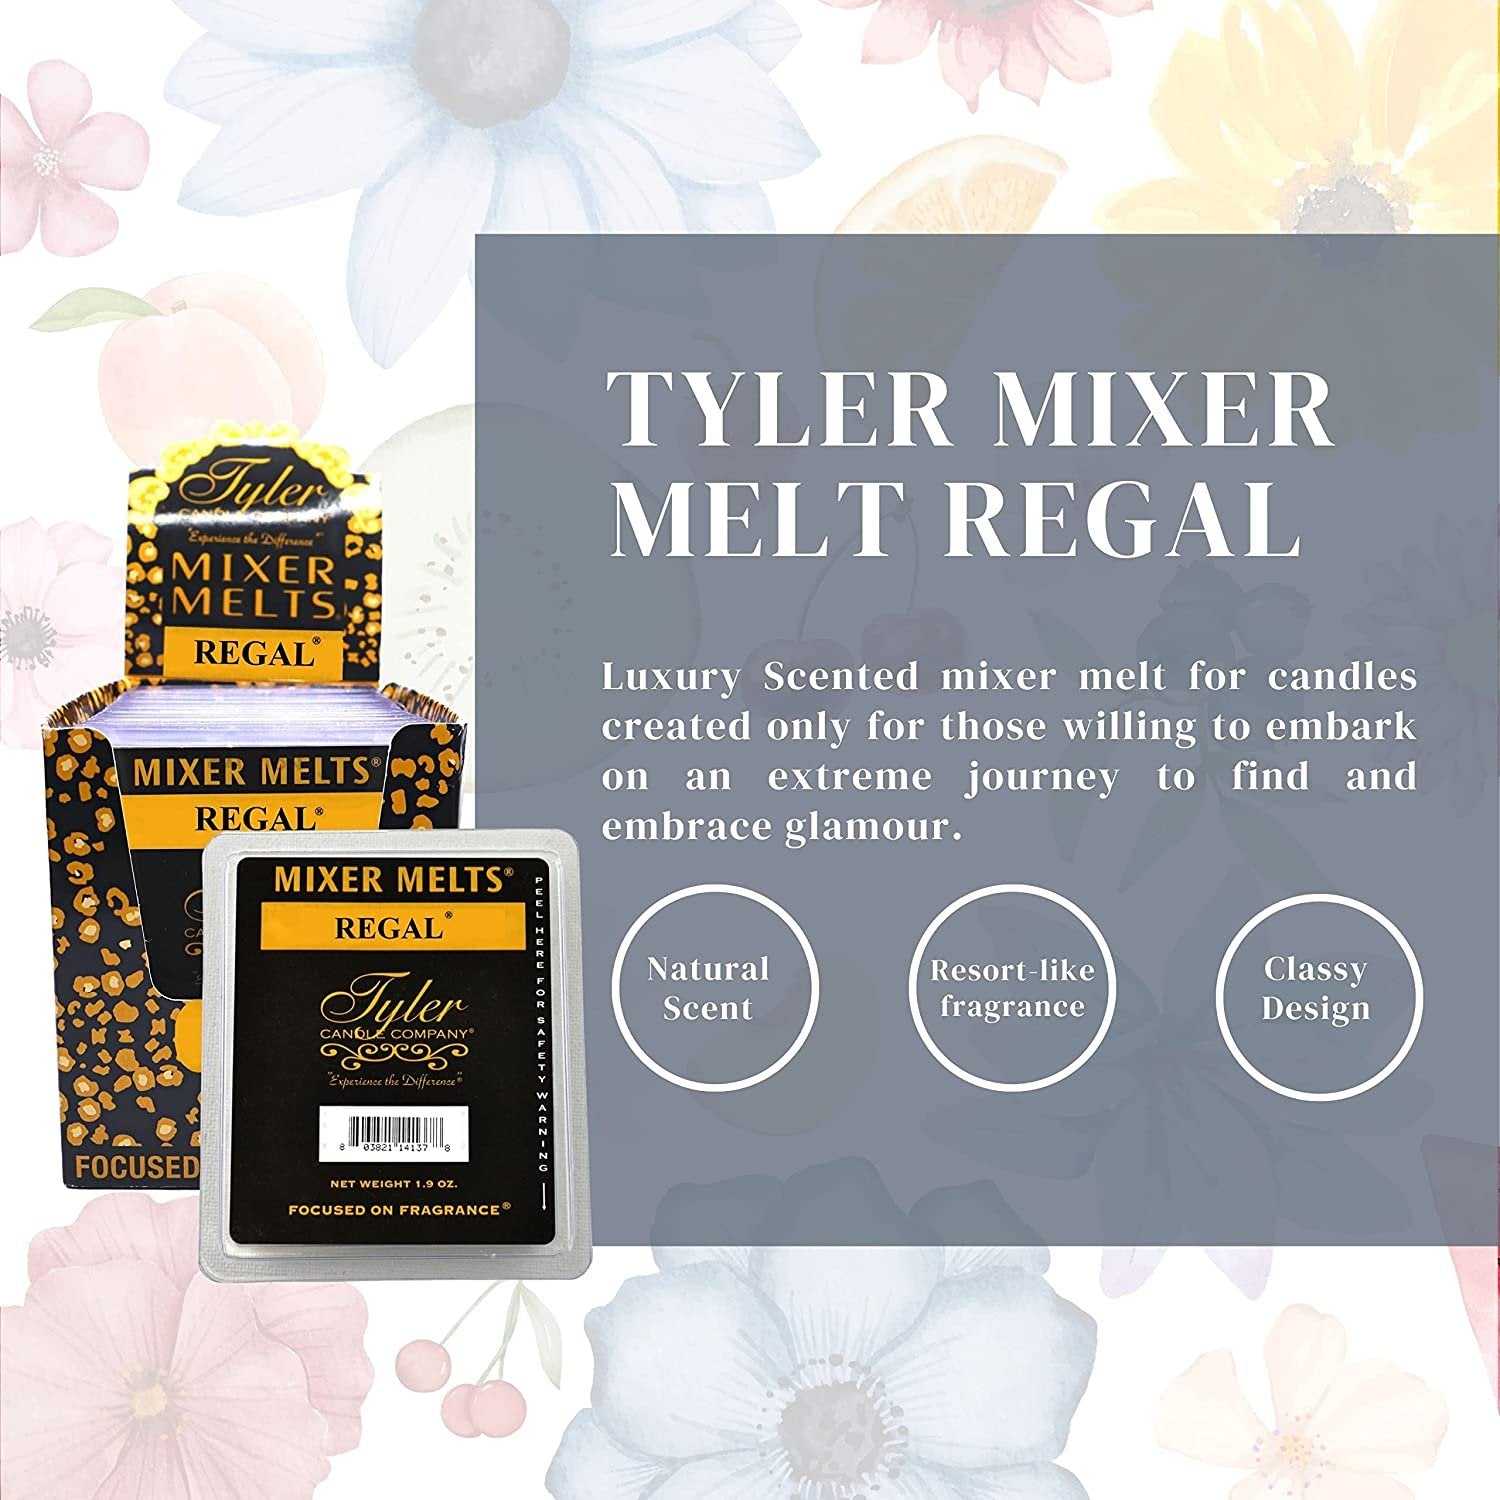 Tyler Candle Company Regal Scent Wax Melts - Soy Wax Scented Mixer Melts with Essential Oils for Wax Warmer - Pack of 4, 6 Bars per Melt Multi Purpose Key Chain